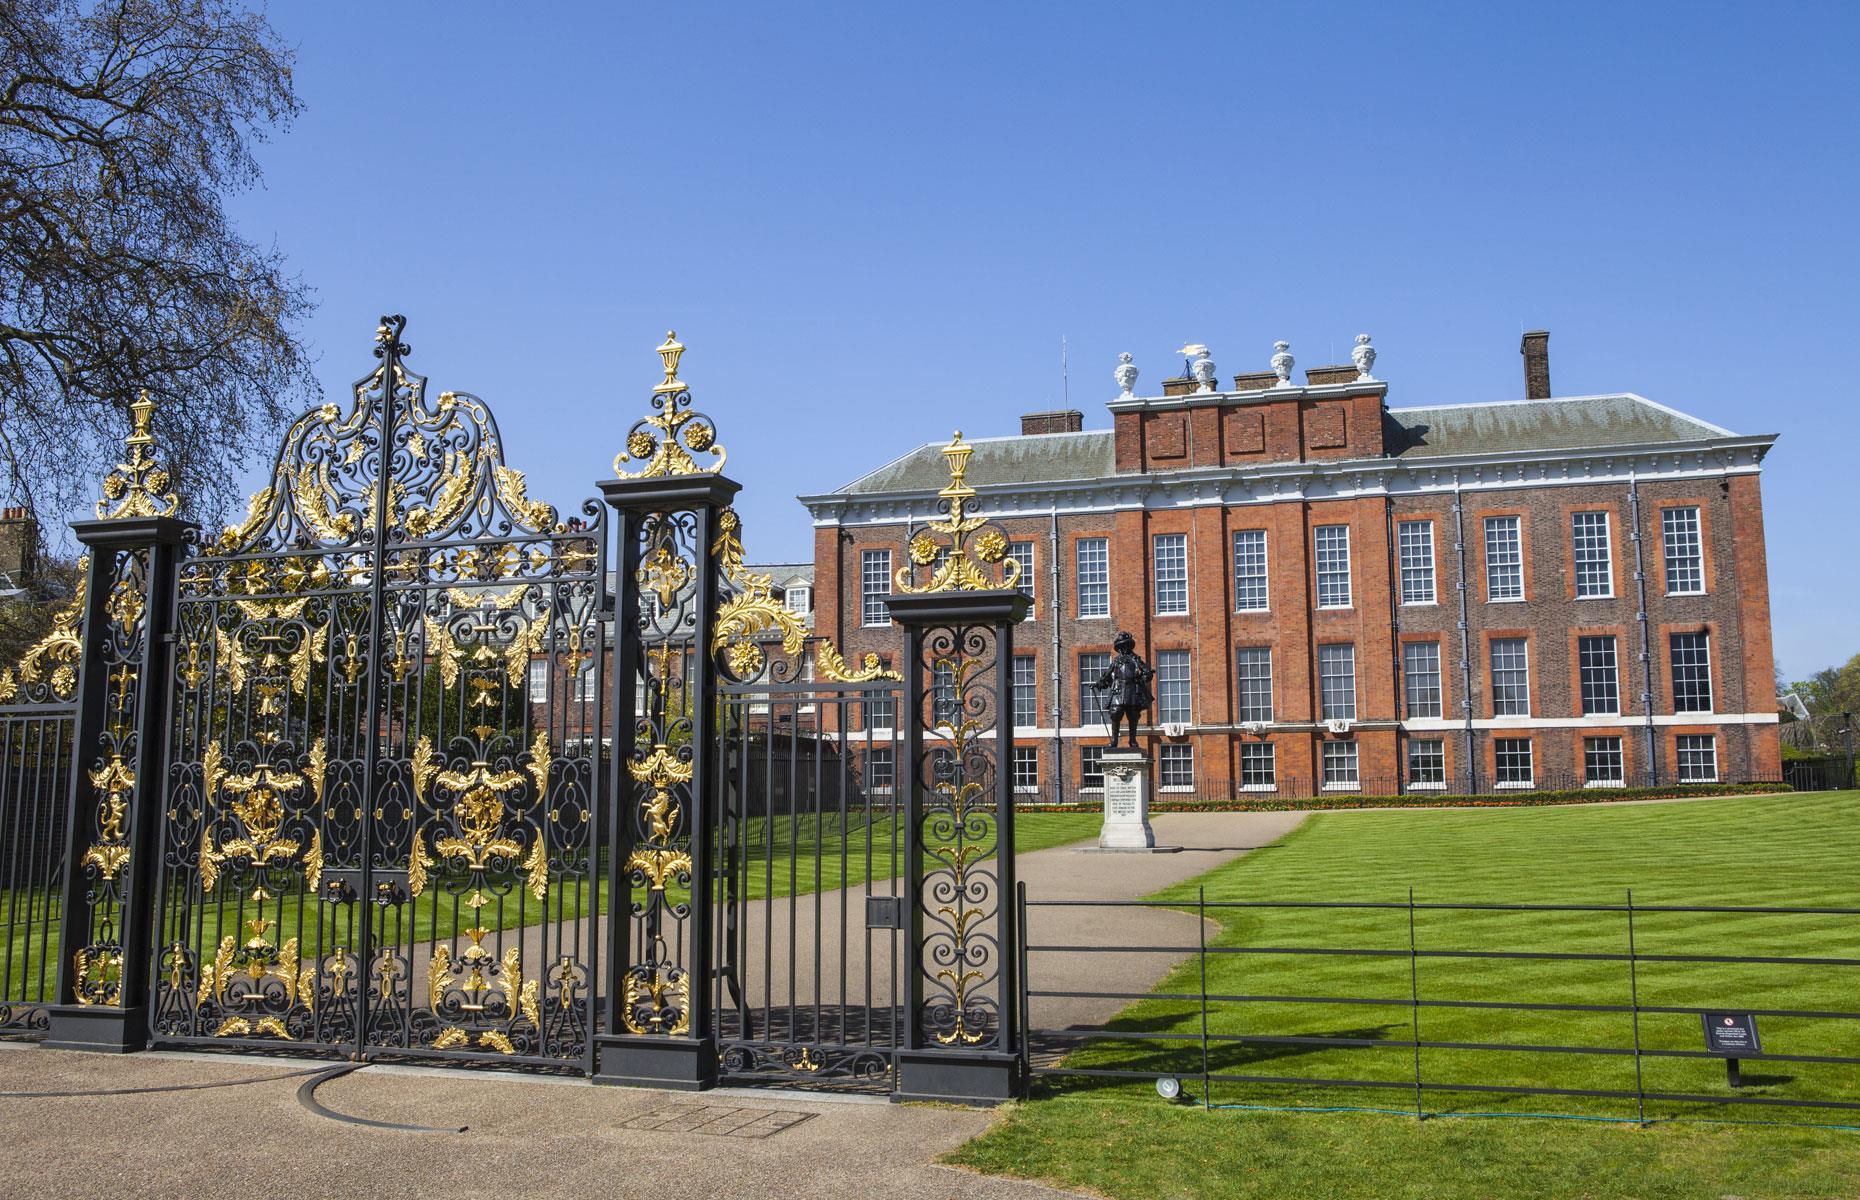 A surprising guide to who really lives at Kensington Palace